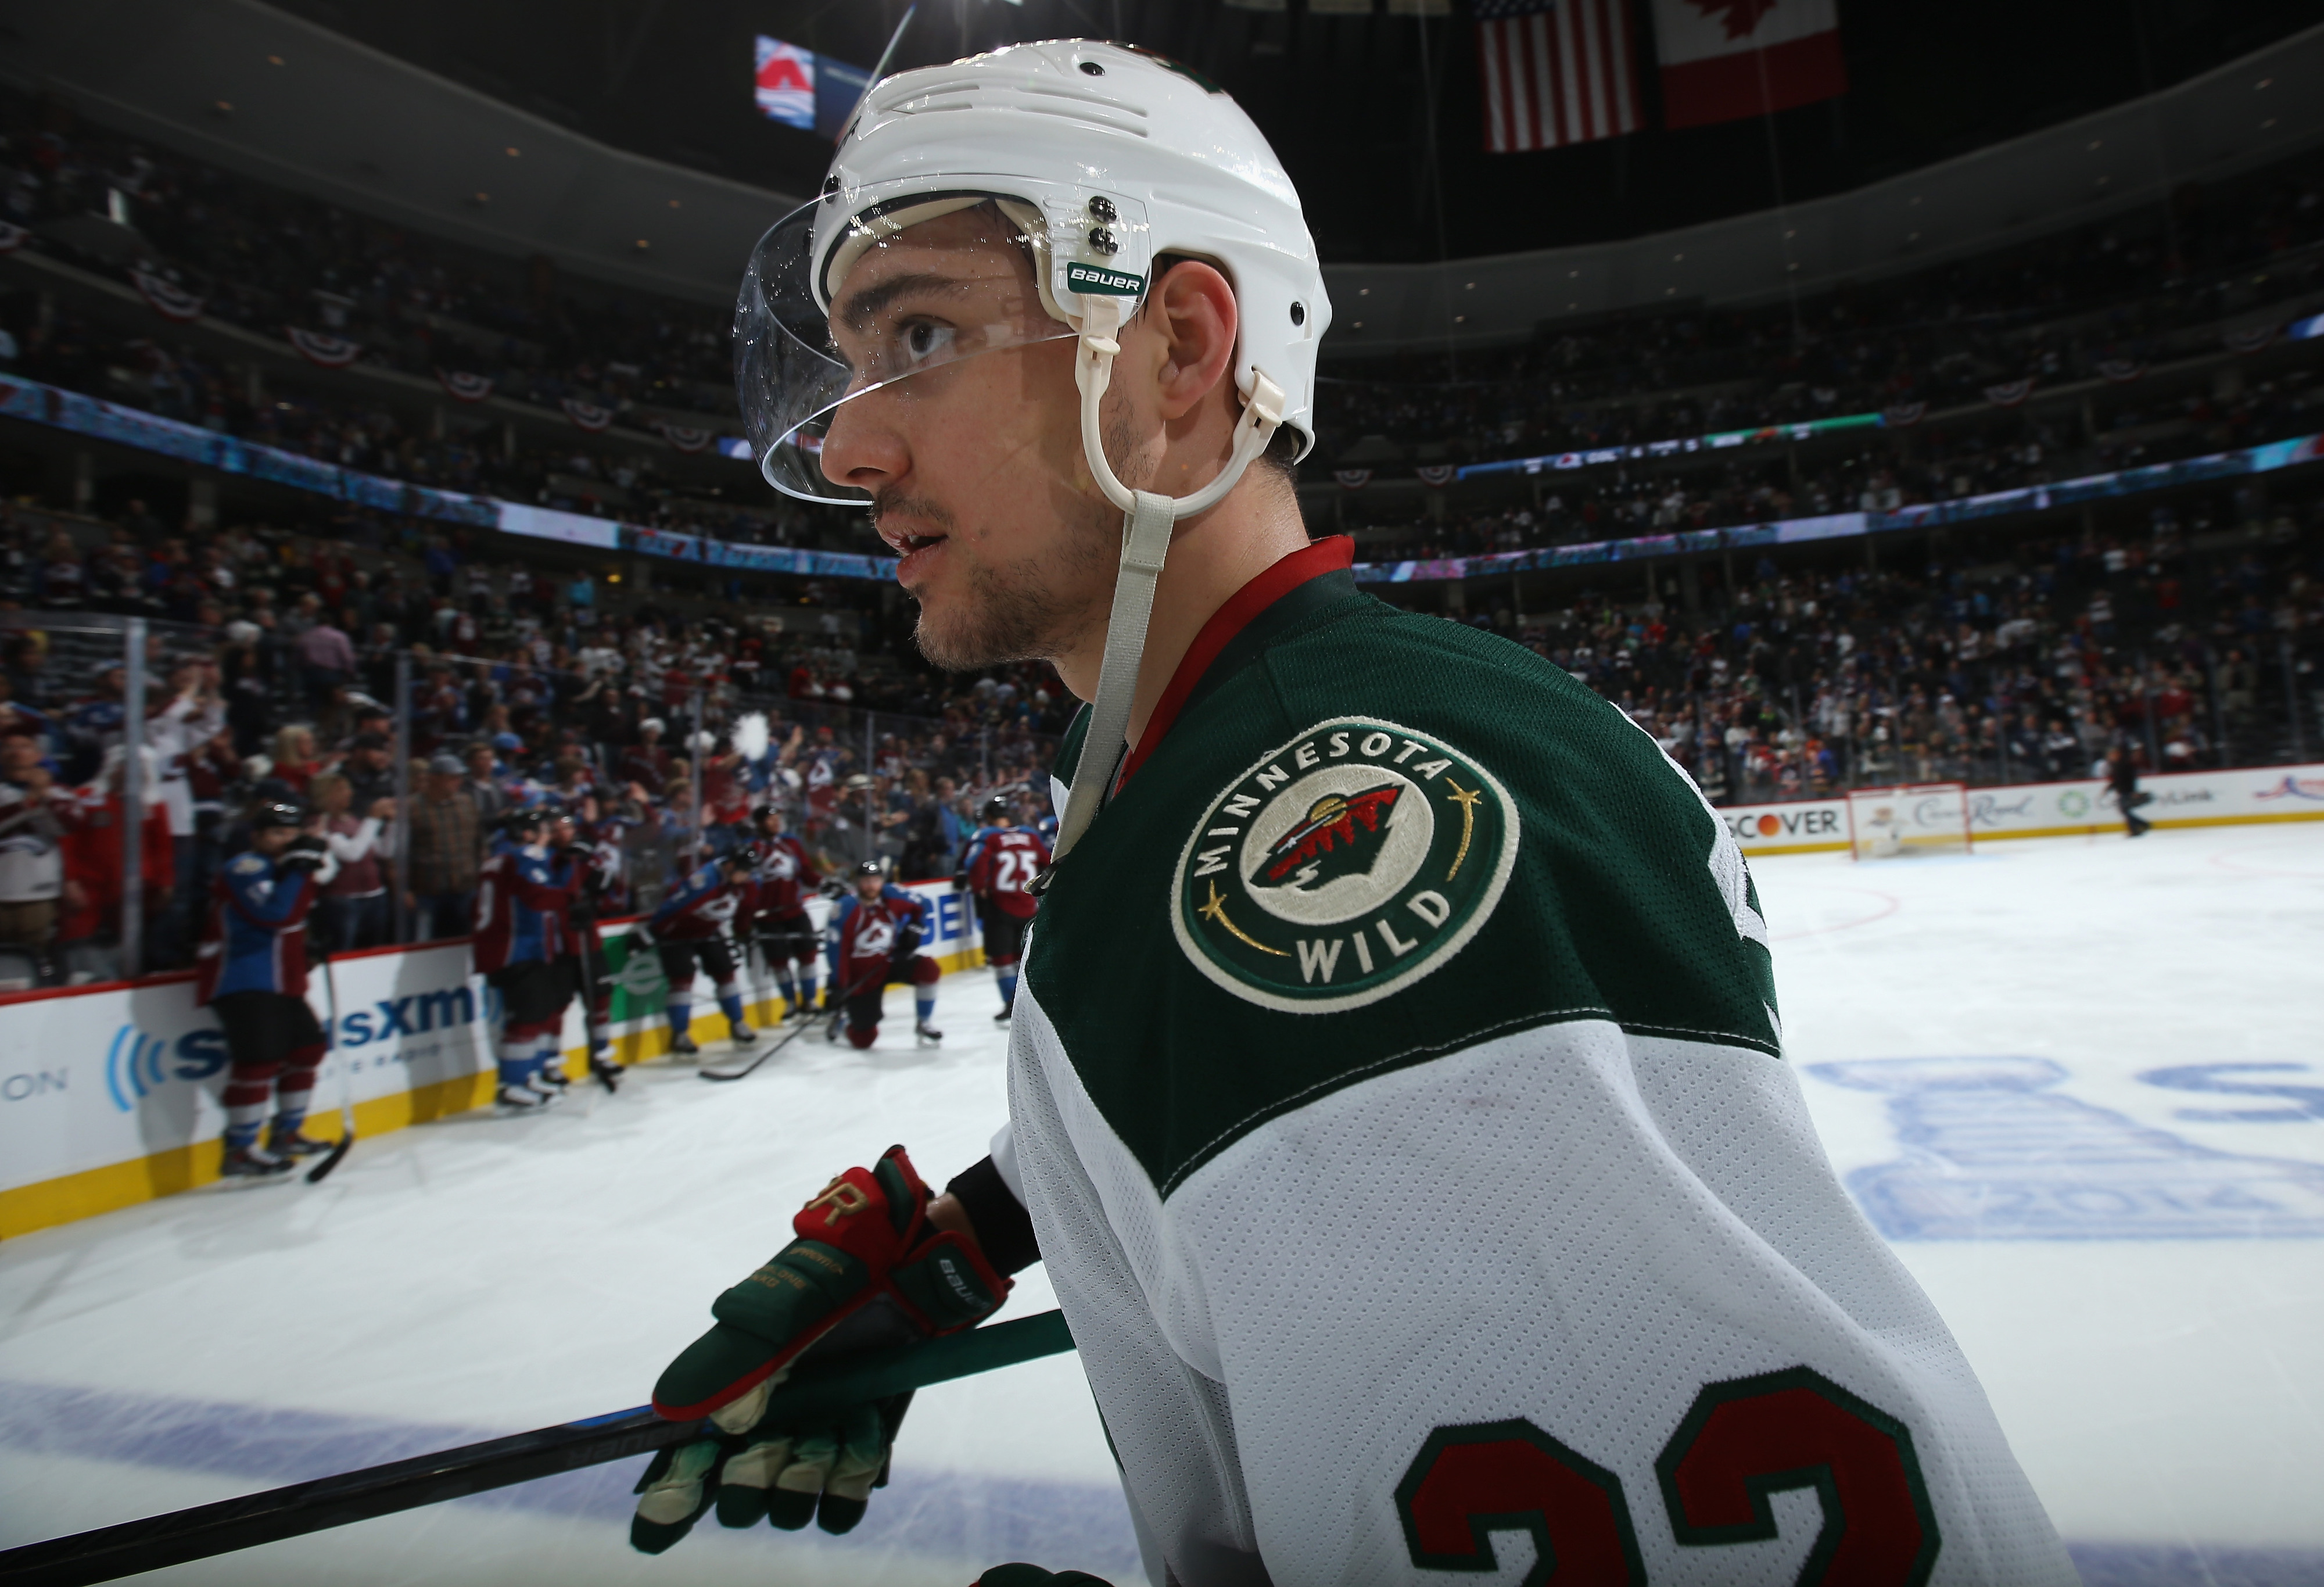 His numbers don't say it (yet), but Nino Niederreiter has the skills to be an excellent Power Forward for the Wild.